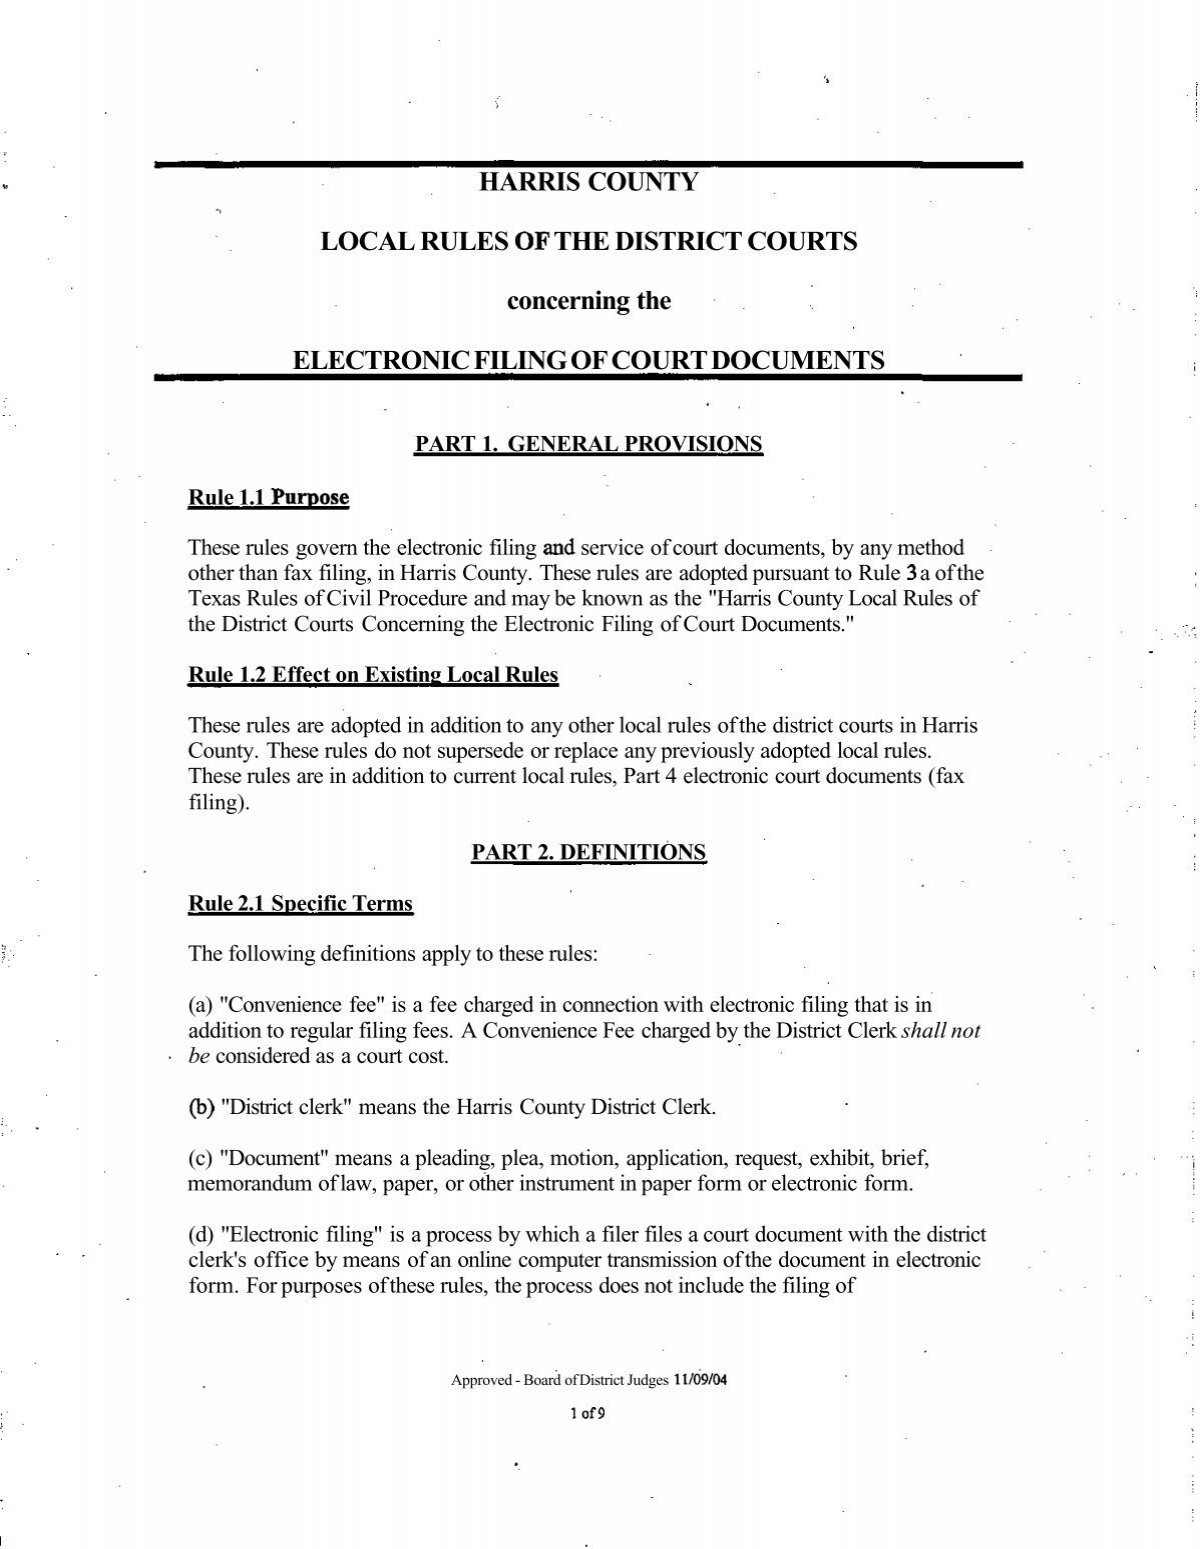 HARRIS COUNTY LOCAL RULES OF THE DISTRICT COURTS